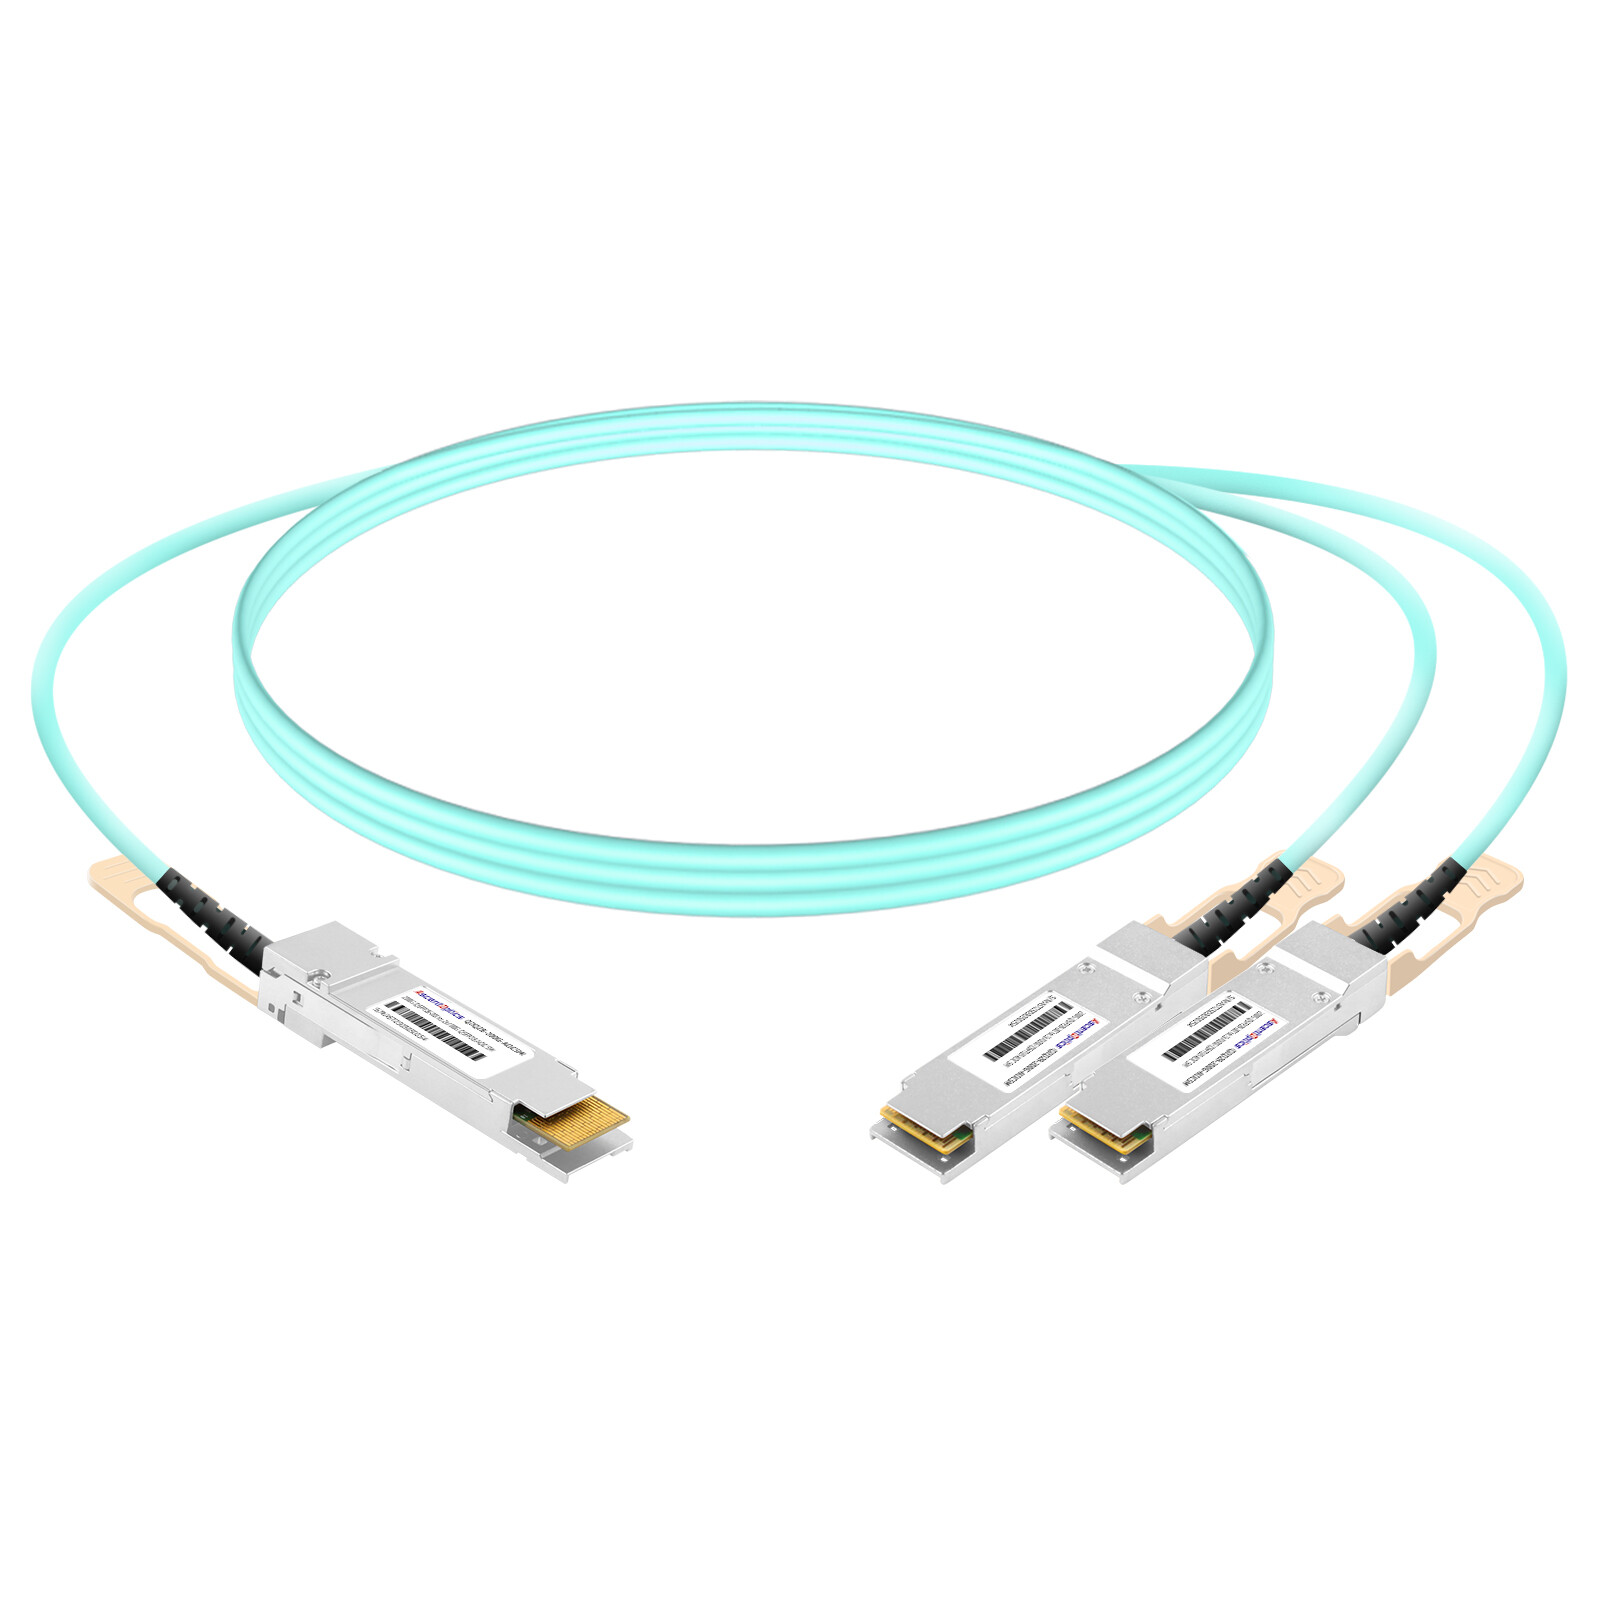 200G QSFP28-DD to 2x 100G QSFP28 Breakout AOC Cable,5 Meters